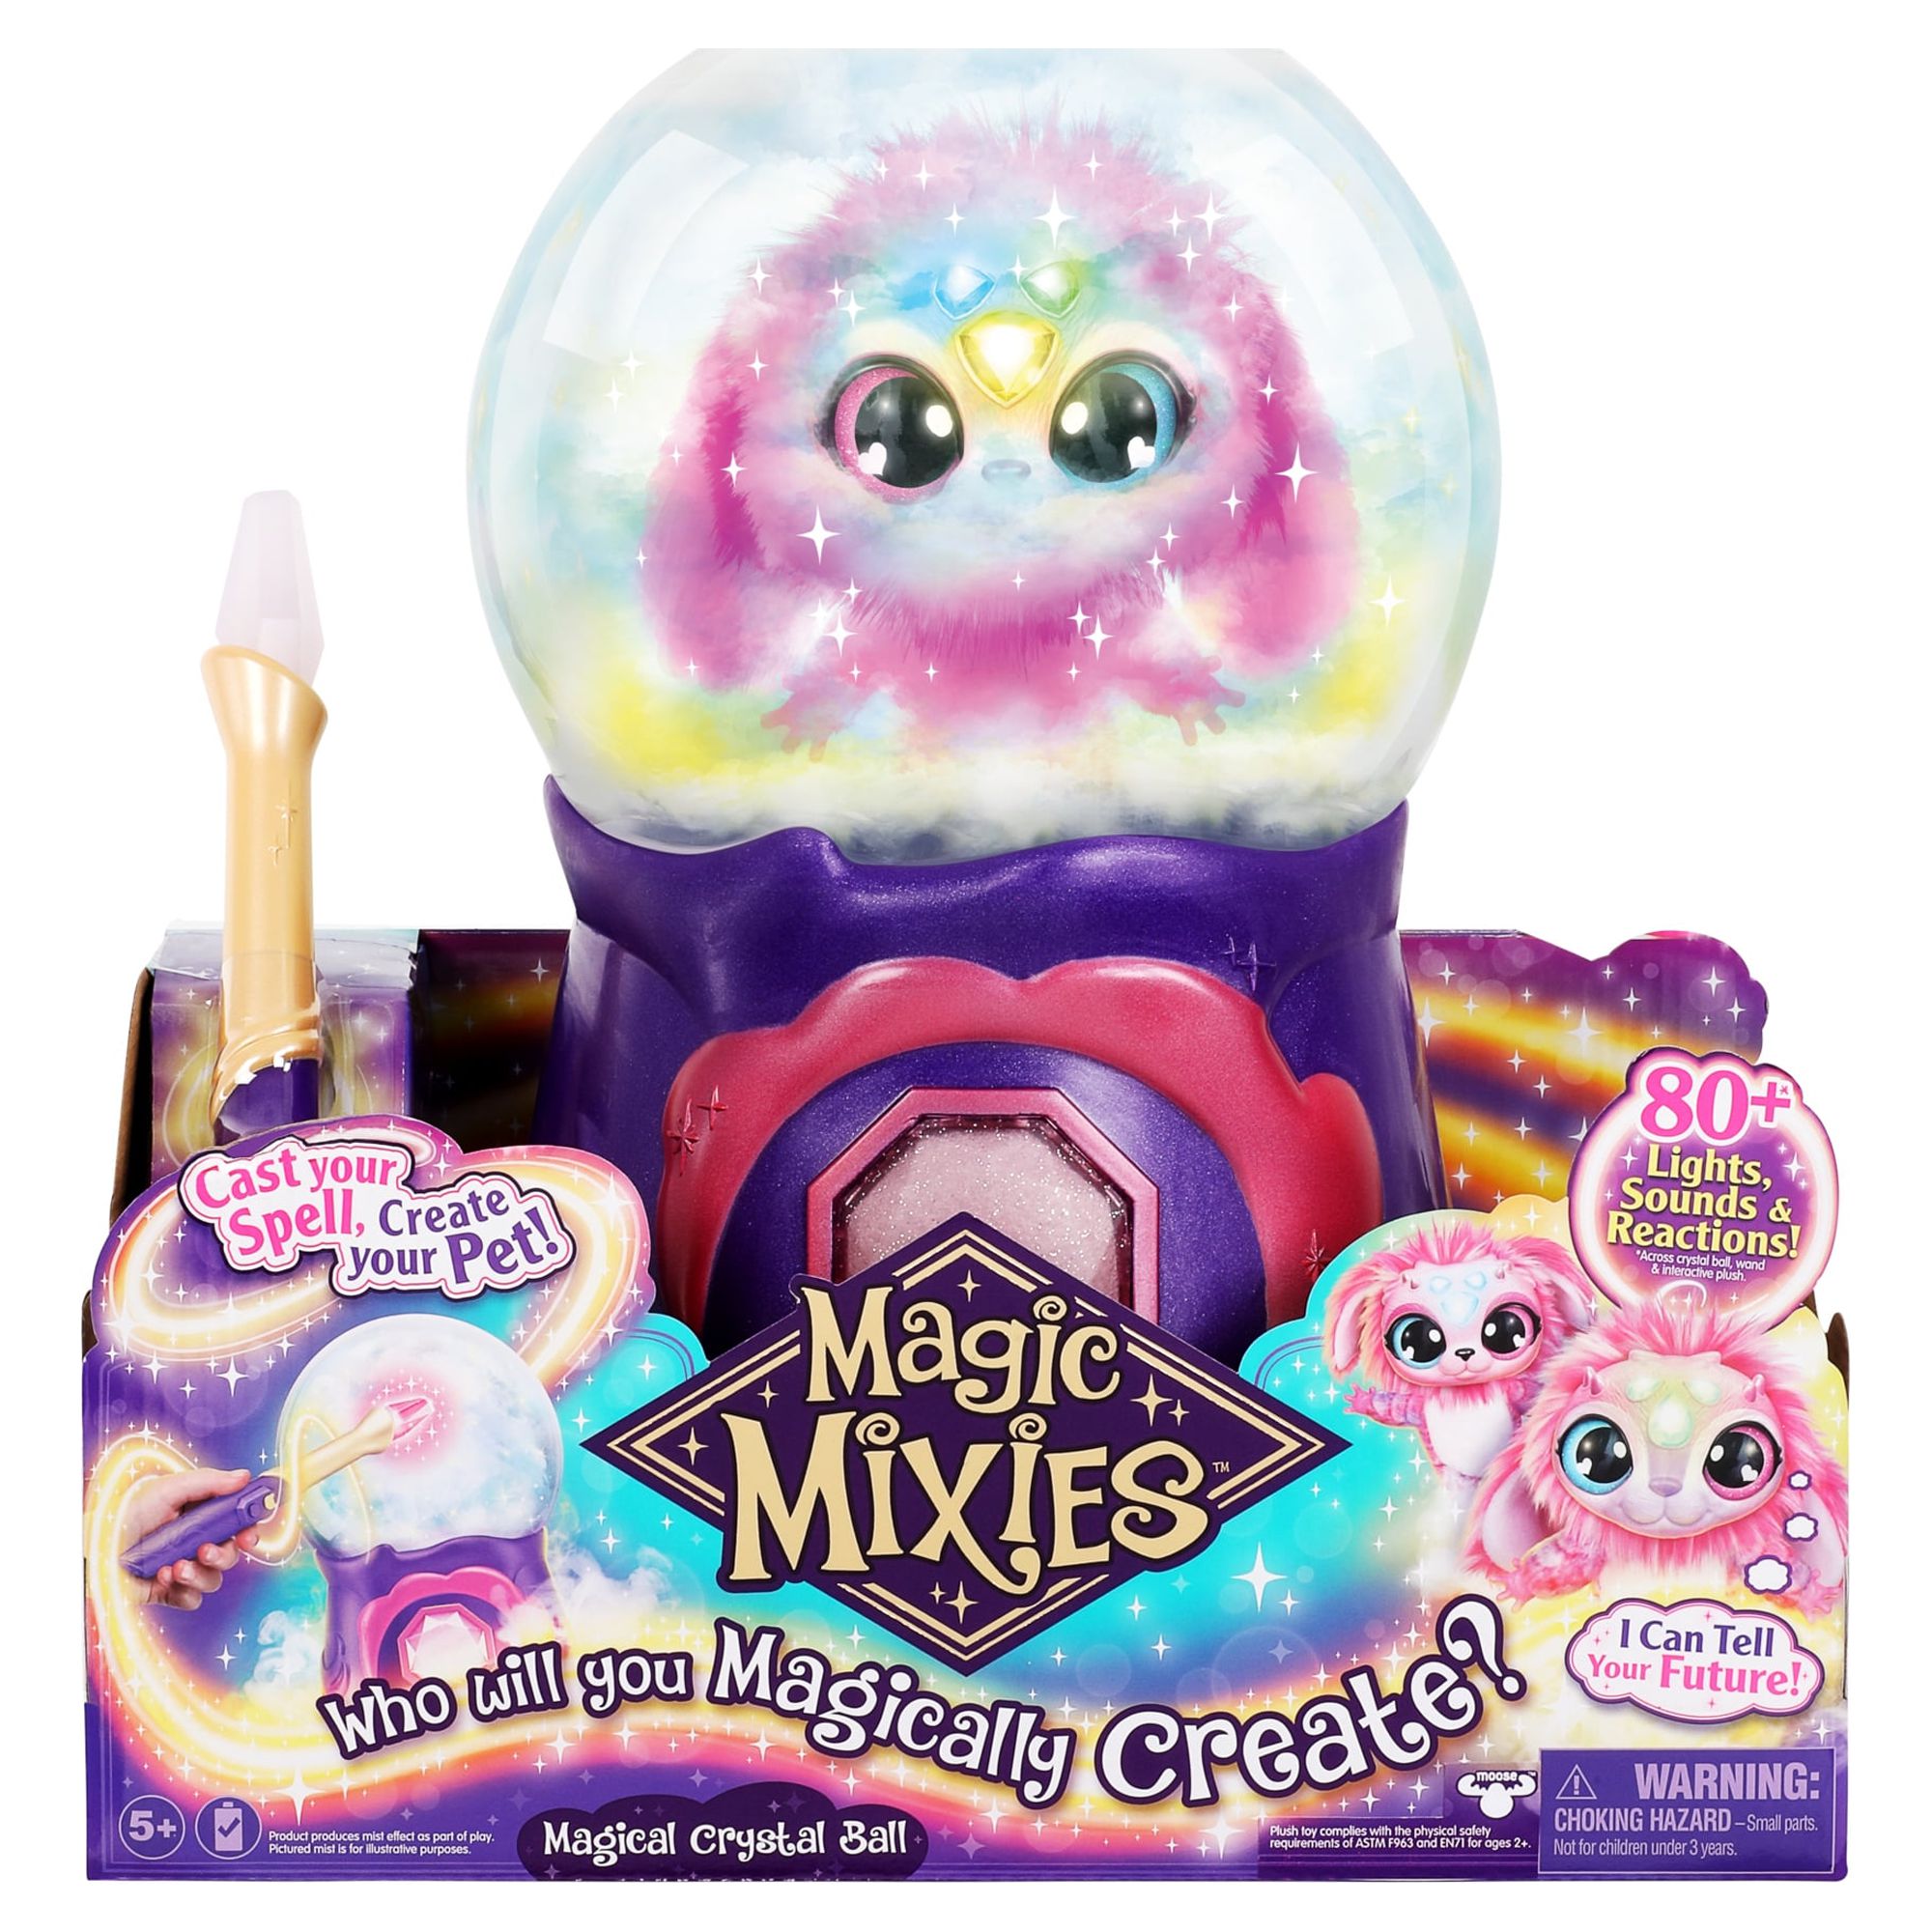 Magic Mixies Magical Misting Crystal Ball with Interactive 8 inch Pink Plush Toy Ages 5+ - image 4 of 18